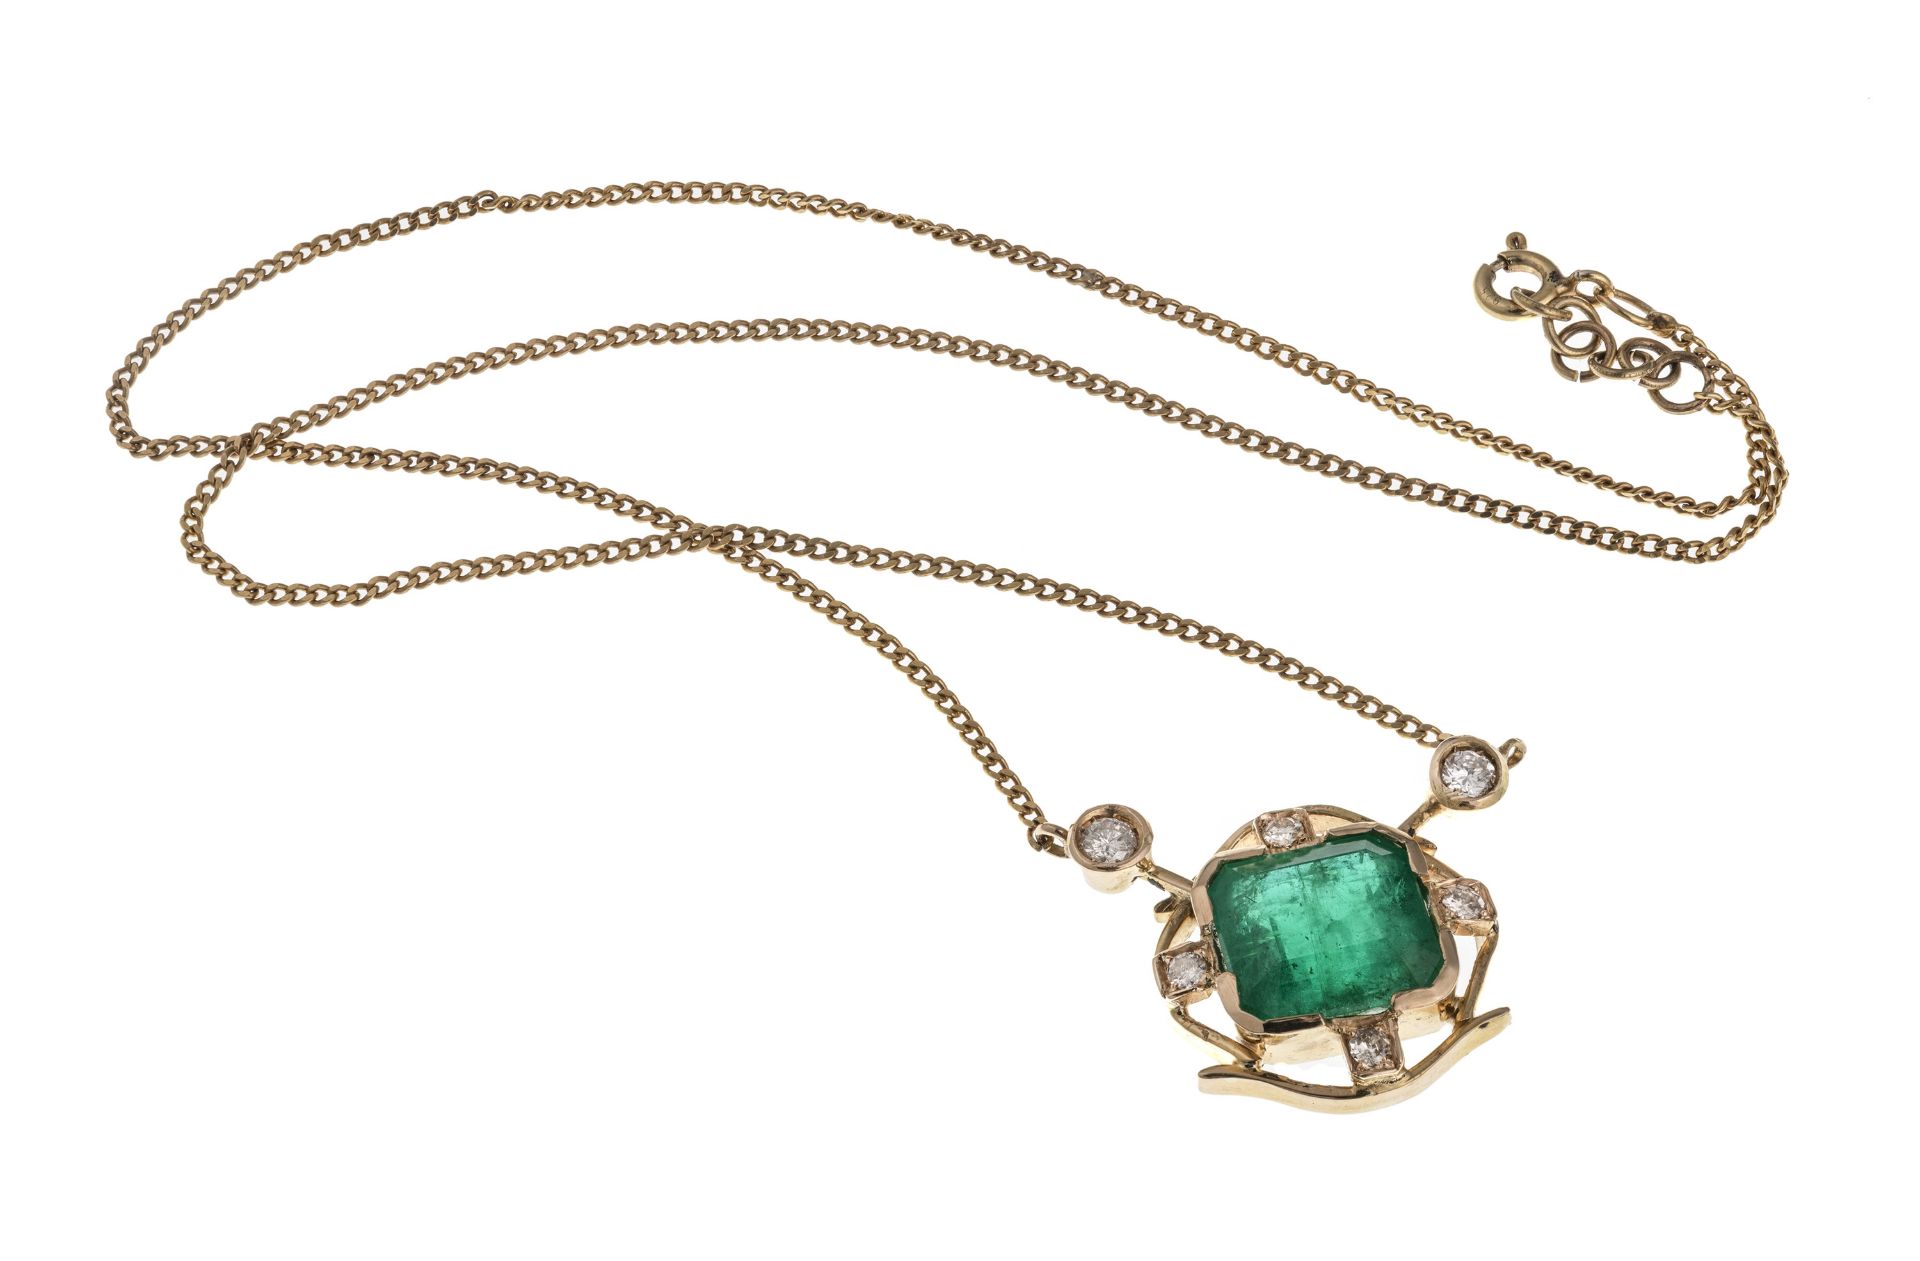 GOLD NECKLACE WITH EMERALD AND DIAMONDS